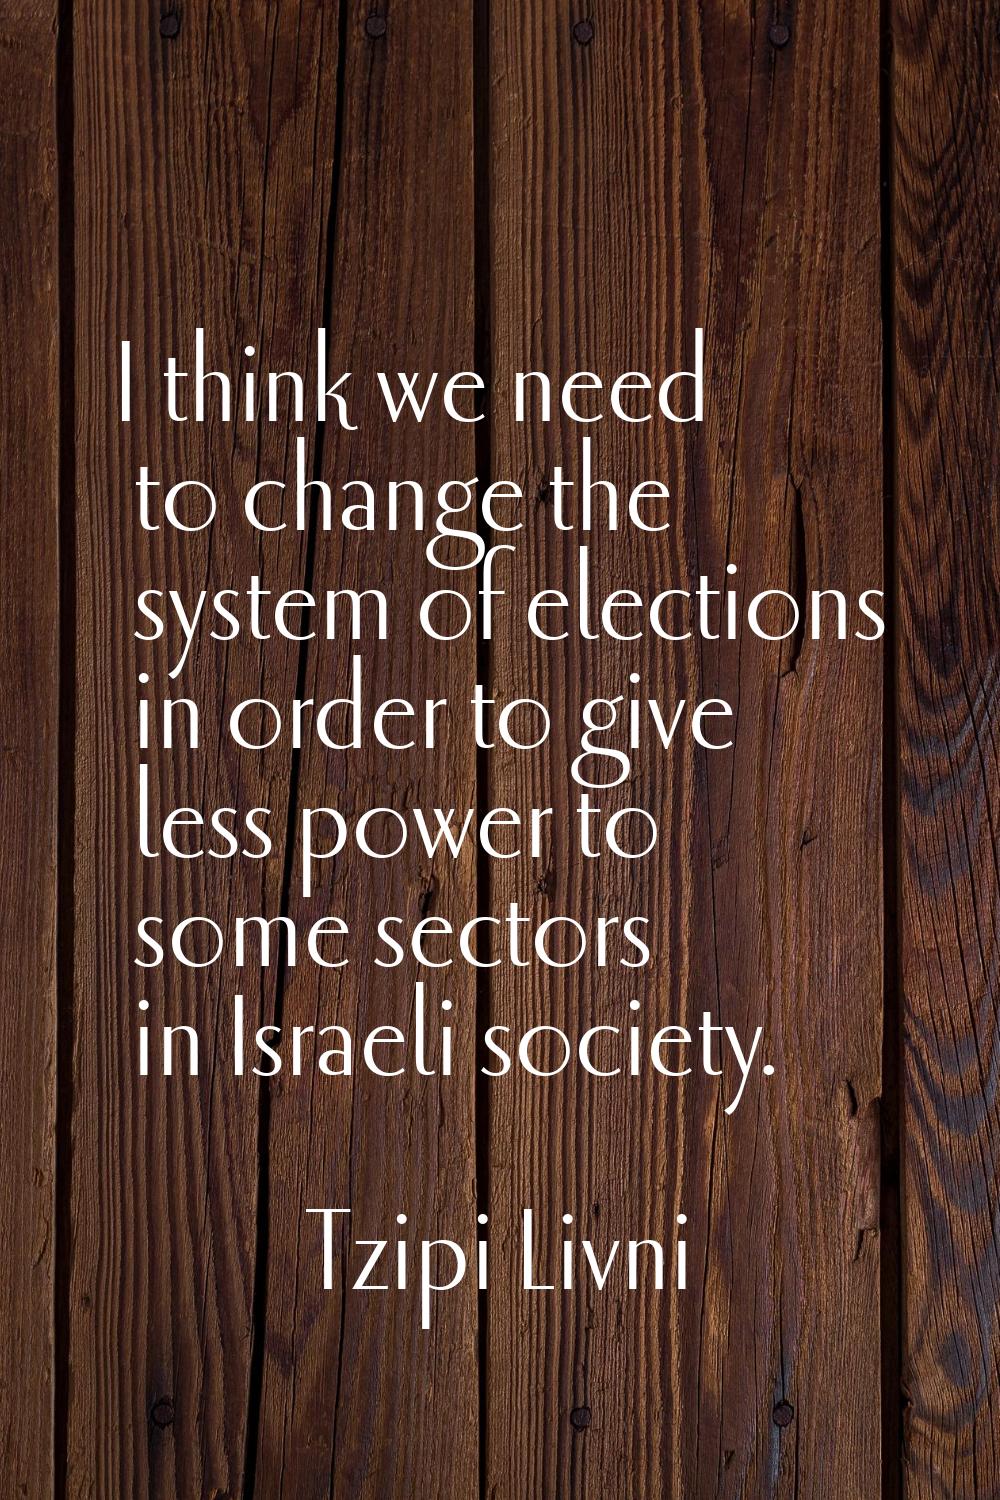 I think we need to change the system of elections in order to give less power to some sectors in Is